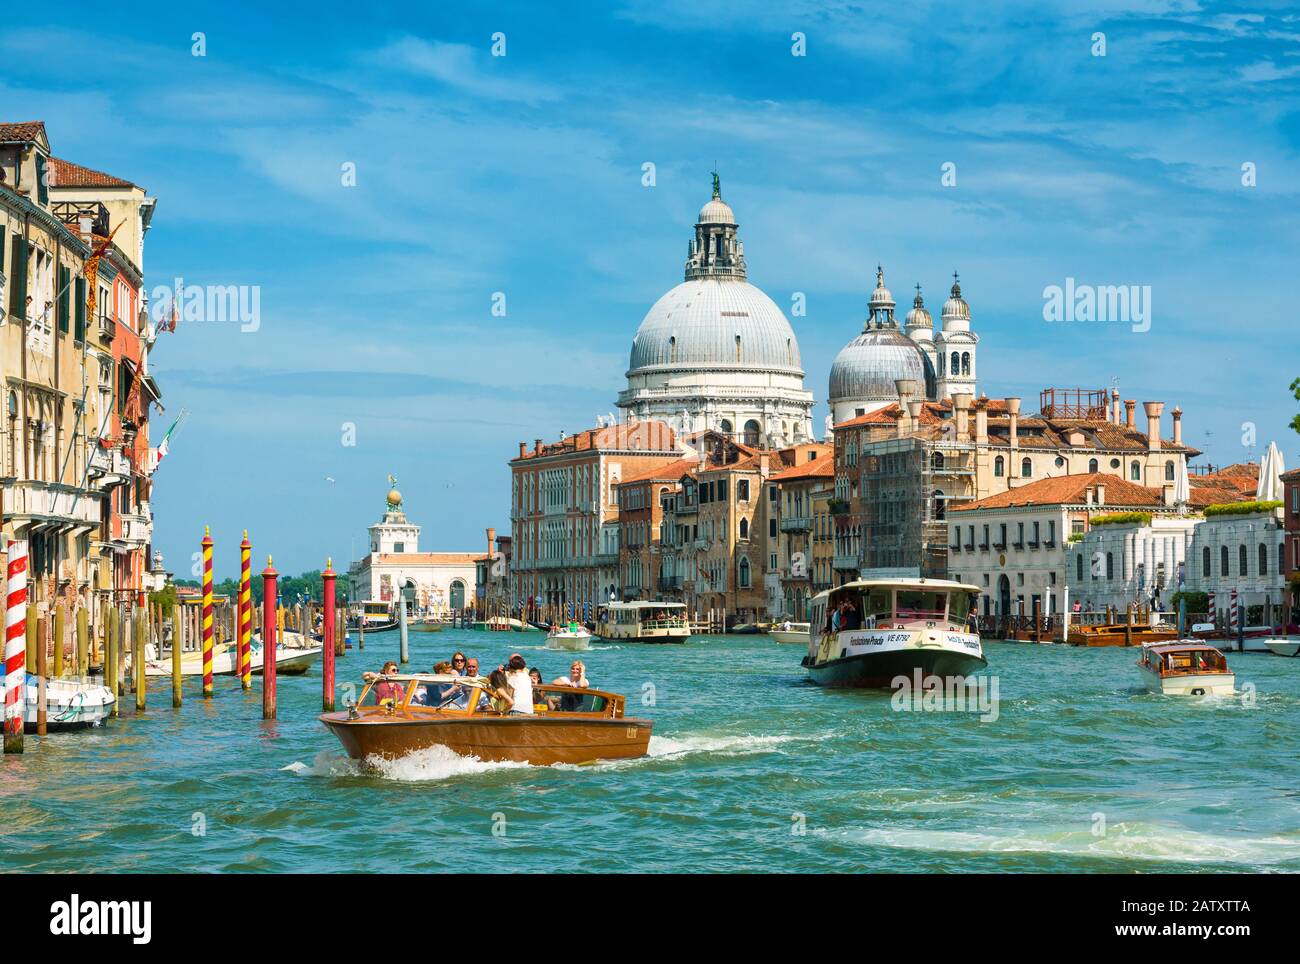 Venice, Italy - May 19, 2017: Water taxis and vaporetto with tourists are sailing along the Grand Canal in Venice. Motor boats are the main transport Stock Photo